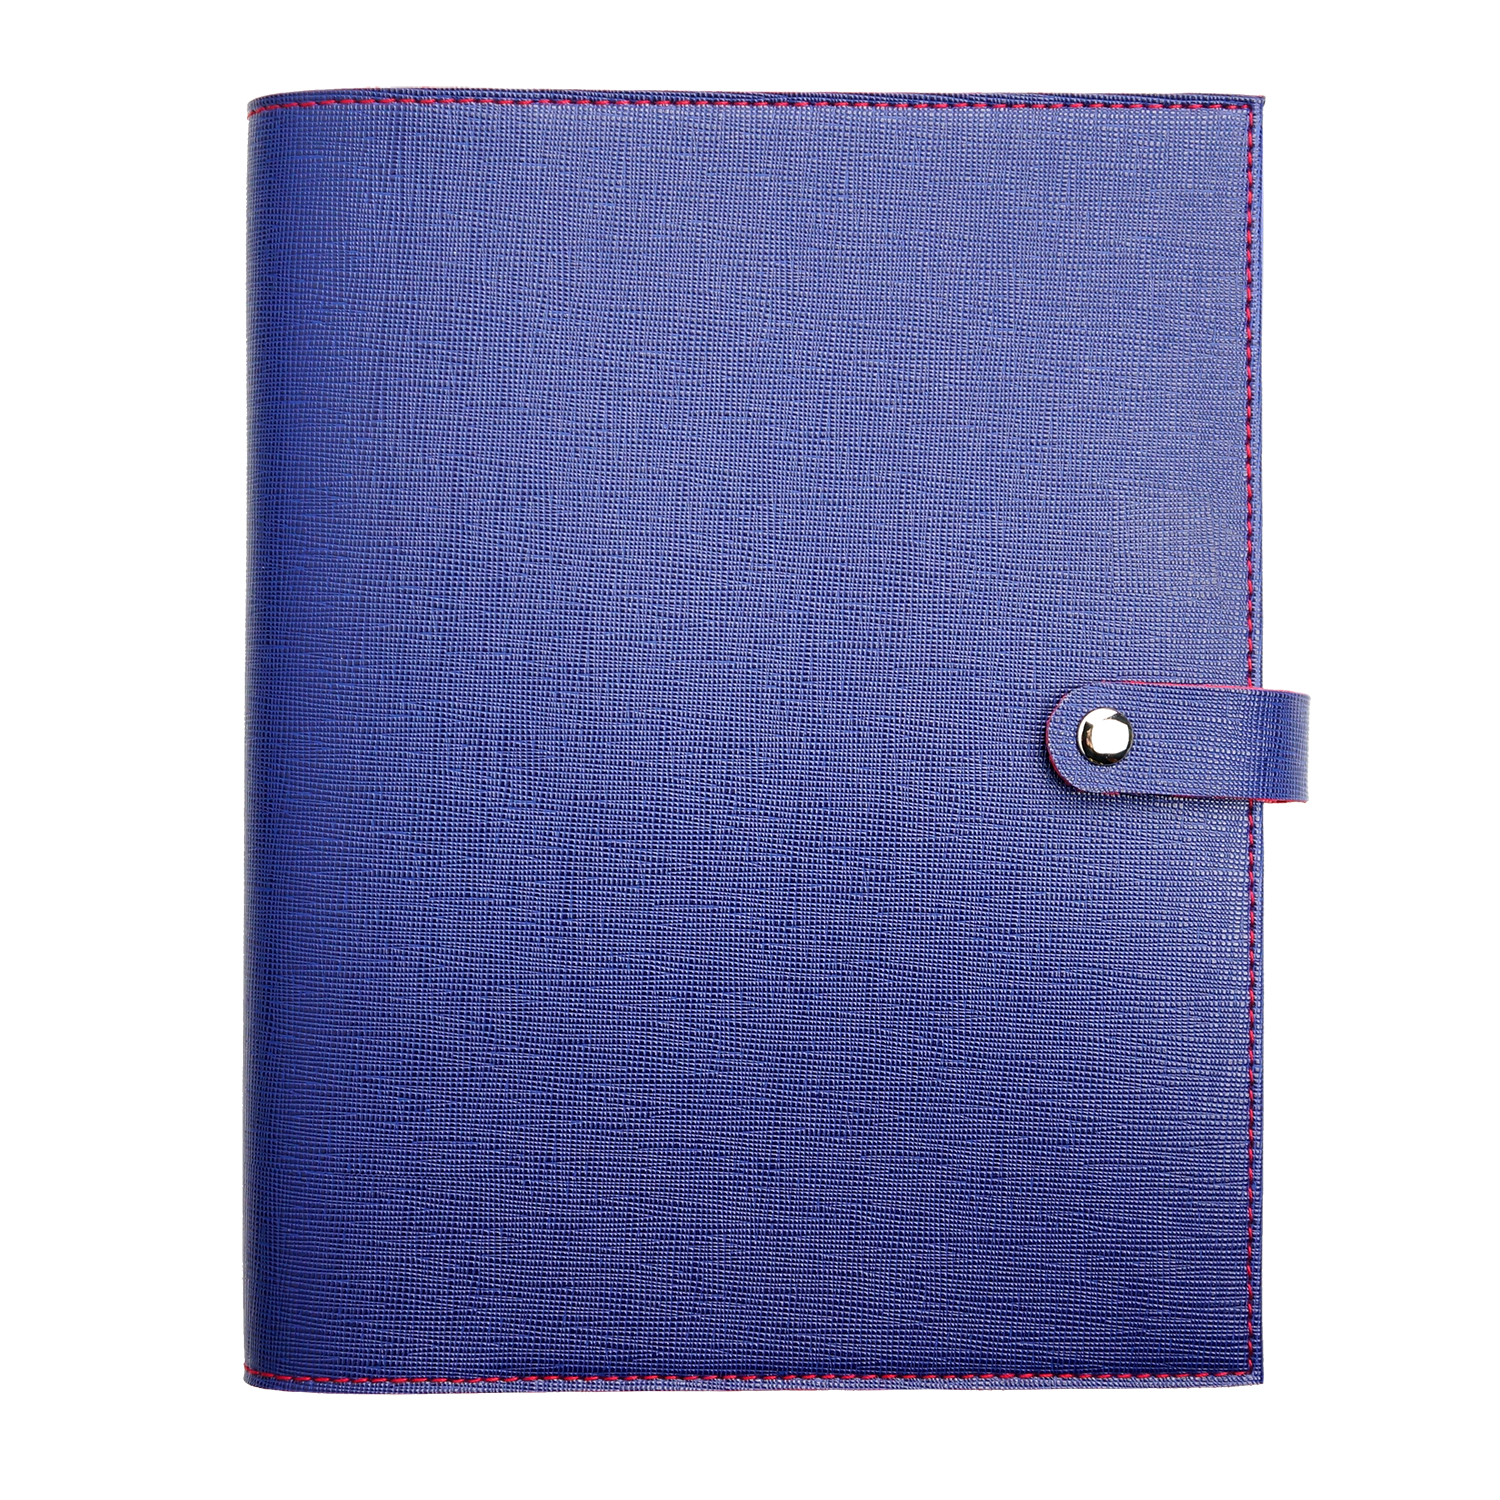 FD-1816 synthetic leather padfolio Blue